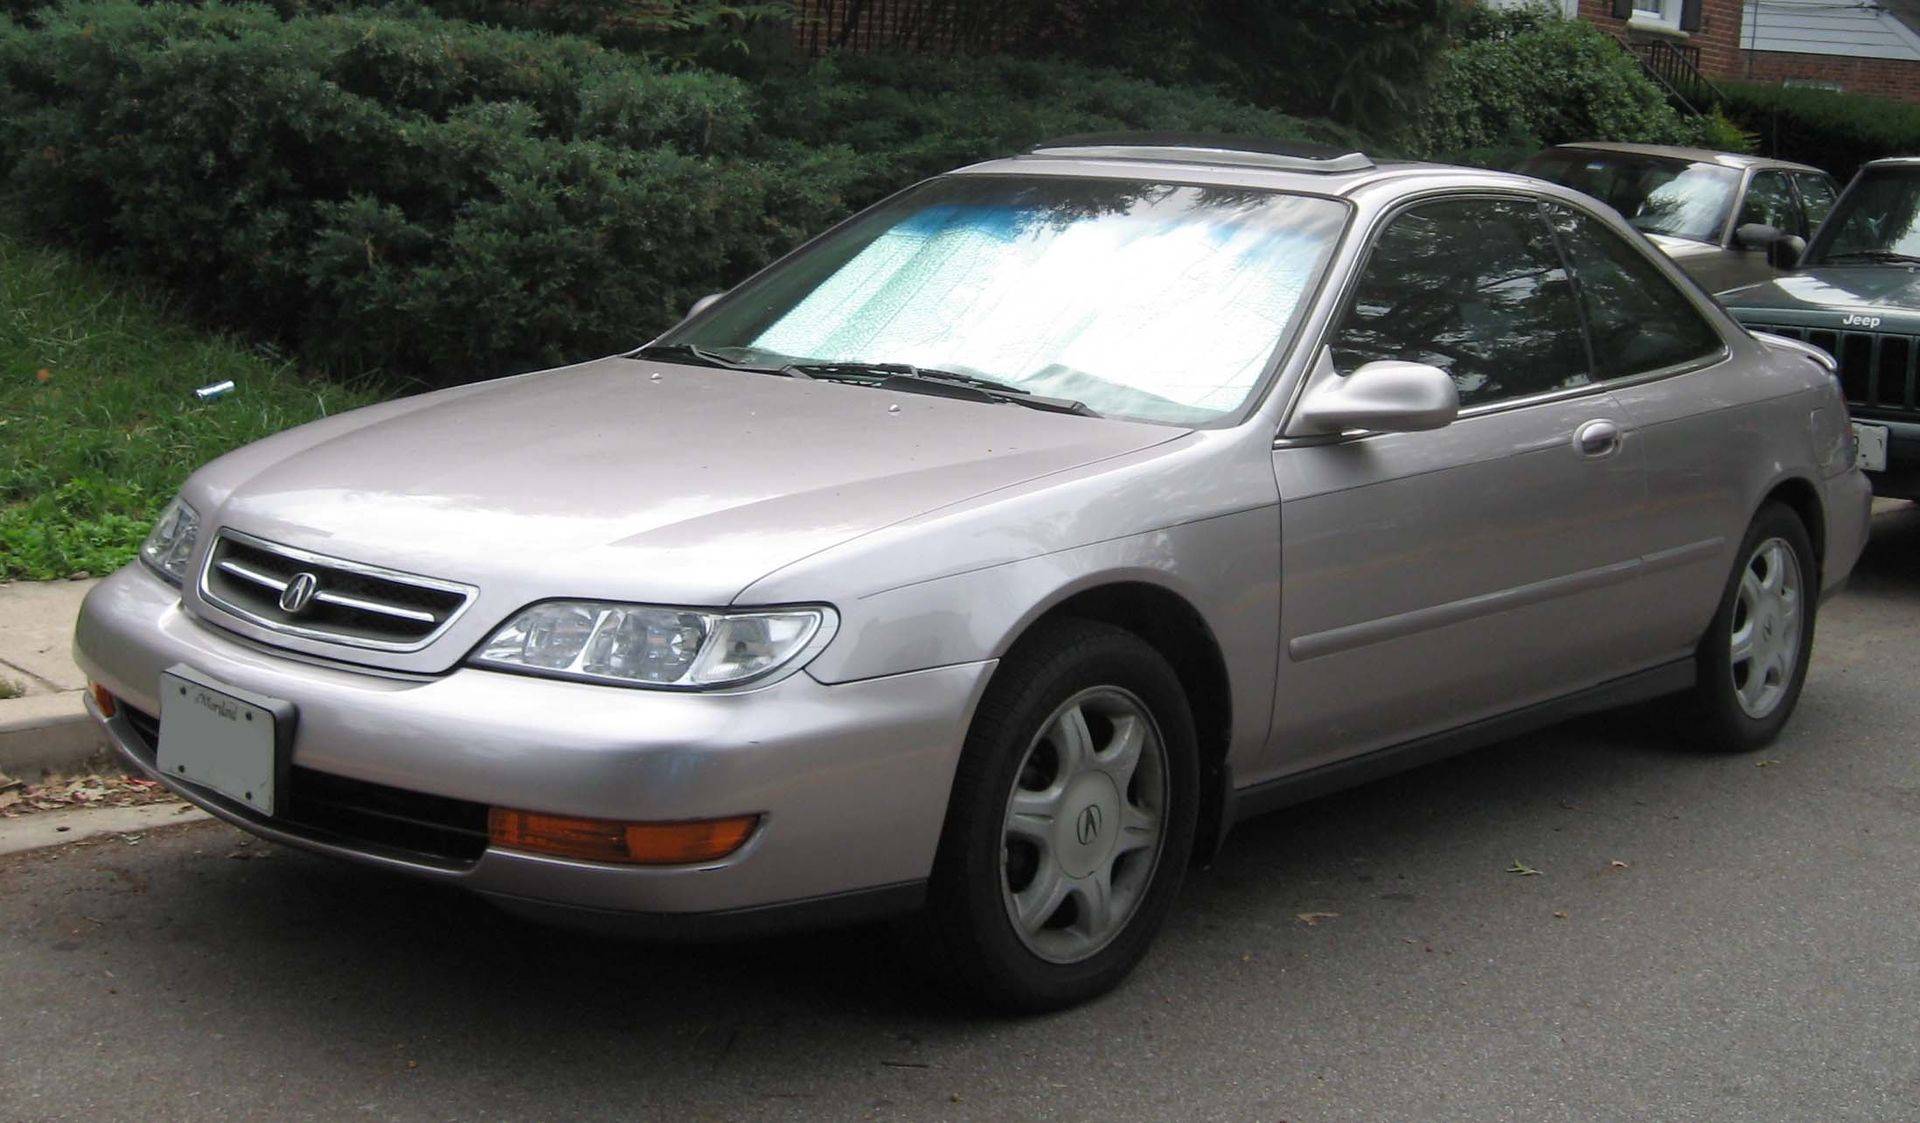 1997 Acura CL 2-Door Coupe 3.0L Base None